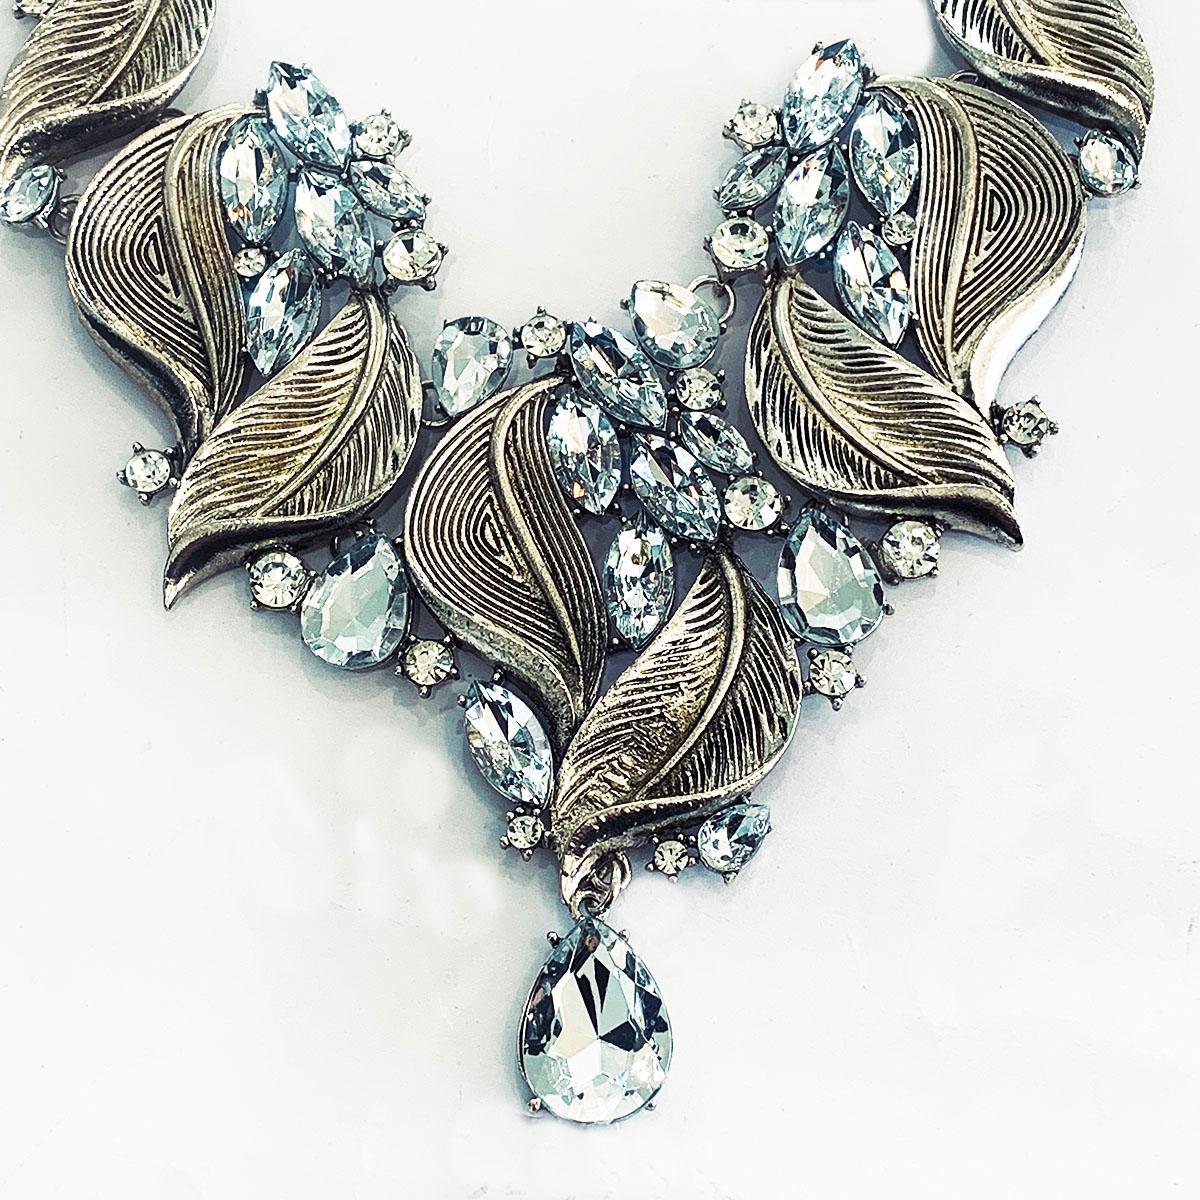 Genuine Oscar De La Renta Necklace Silver tone Leaves with White Crystal Diamantes in elongated octagonal shape of different sizes and a larger pendant with white crystal round diamantes of different sizes interspersed at edges. The whole “pendant”